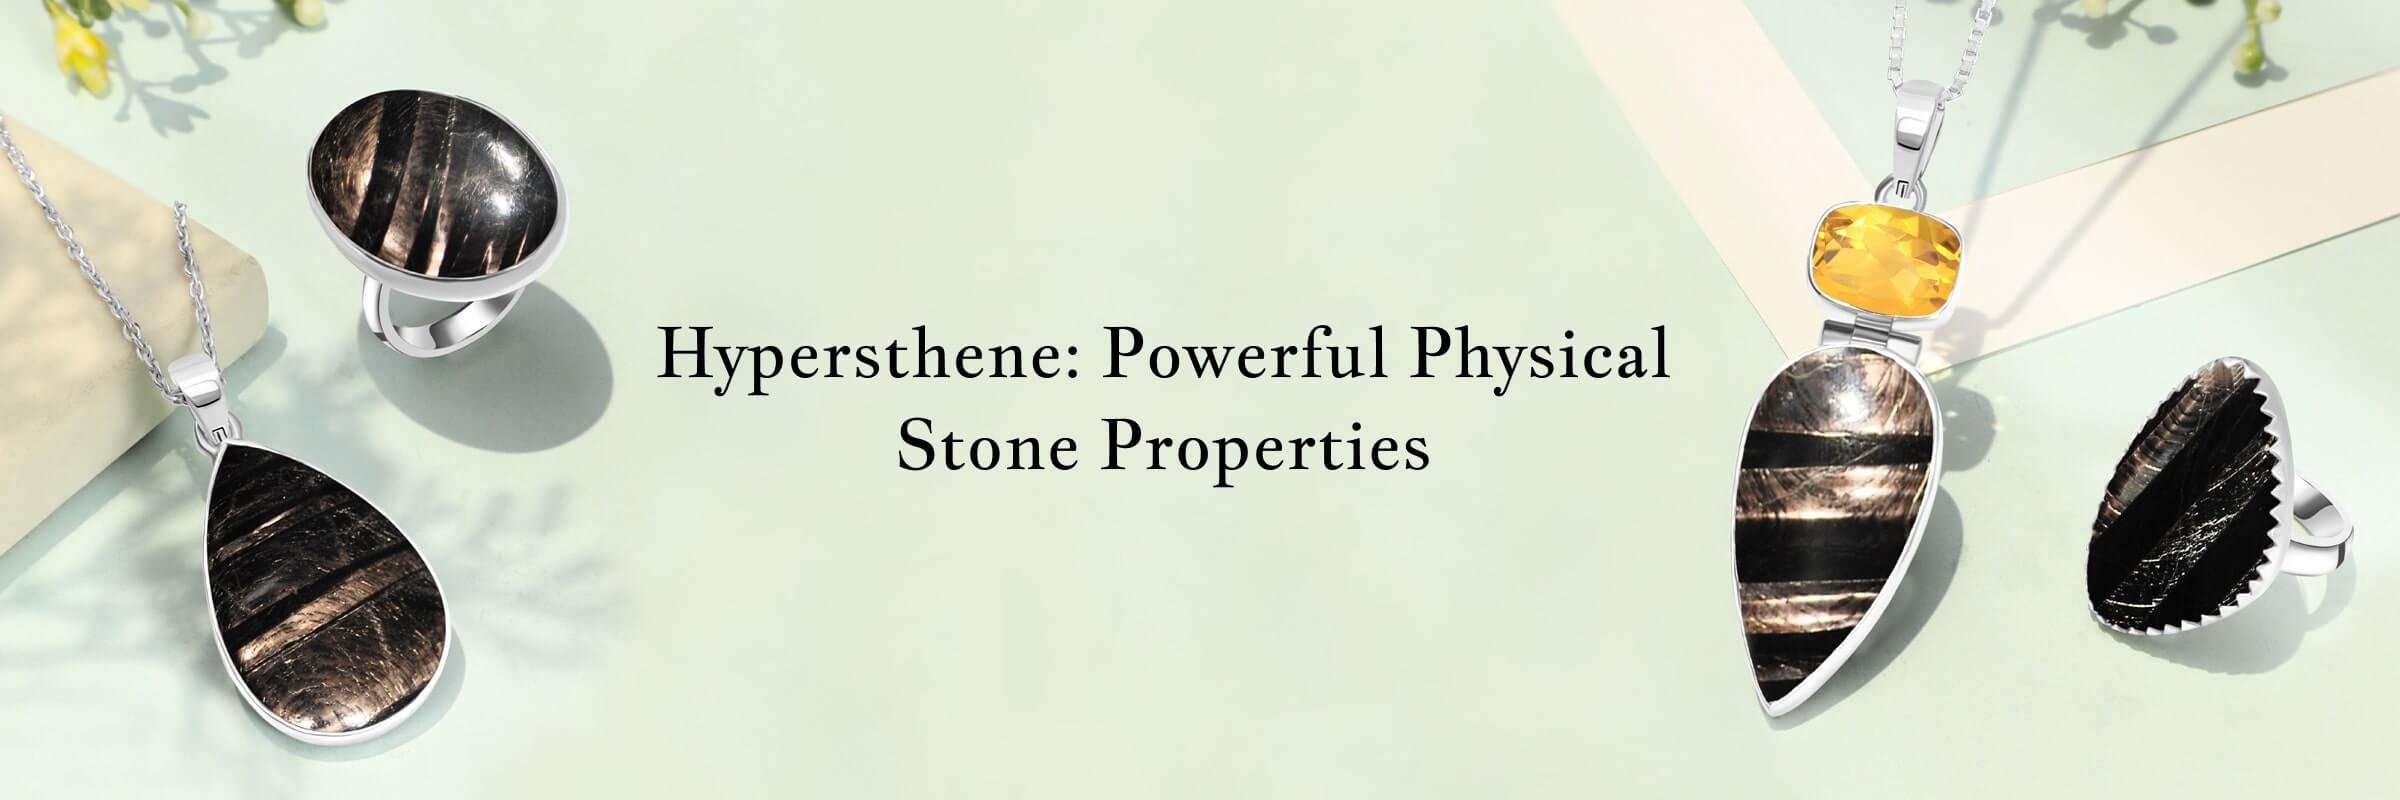 Physical Properties of Hypersthene Stone